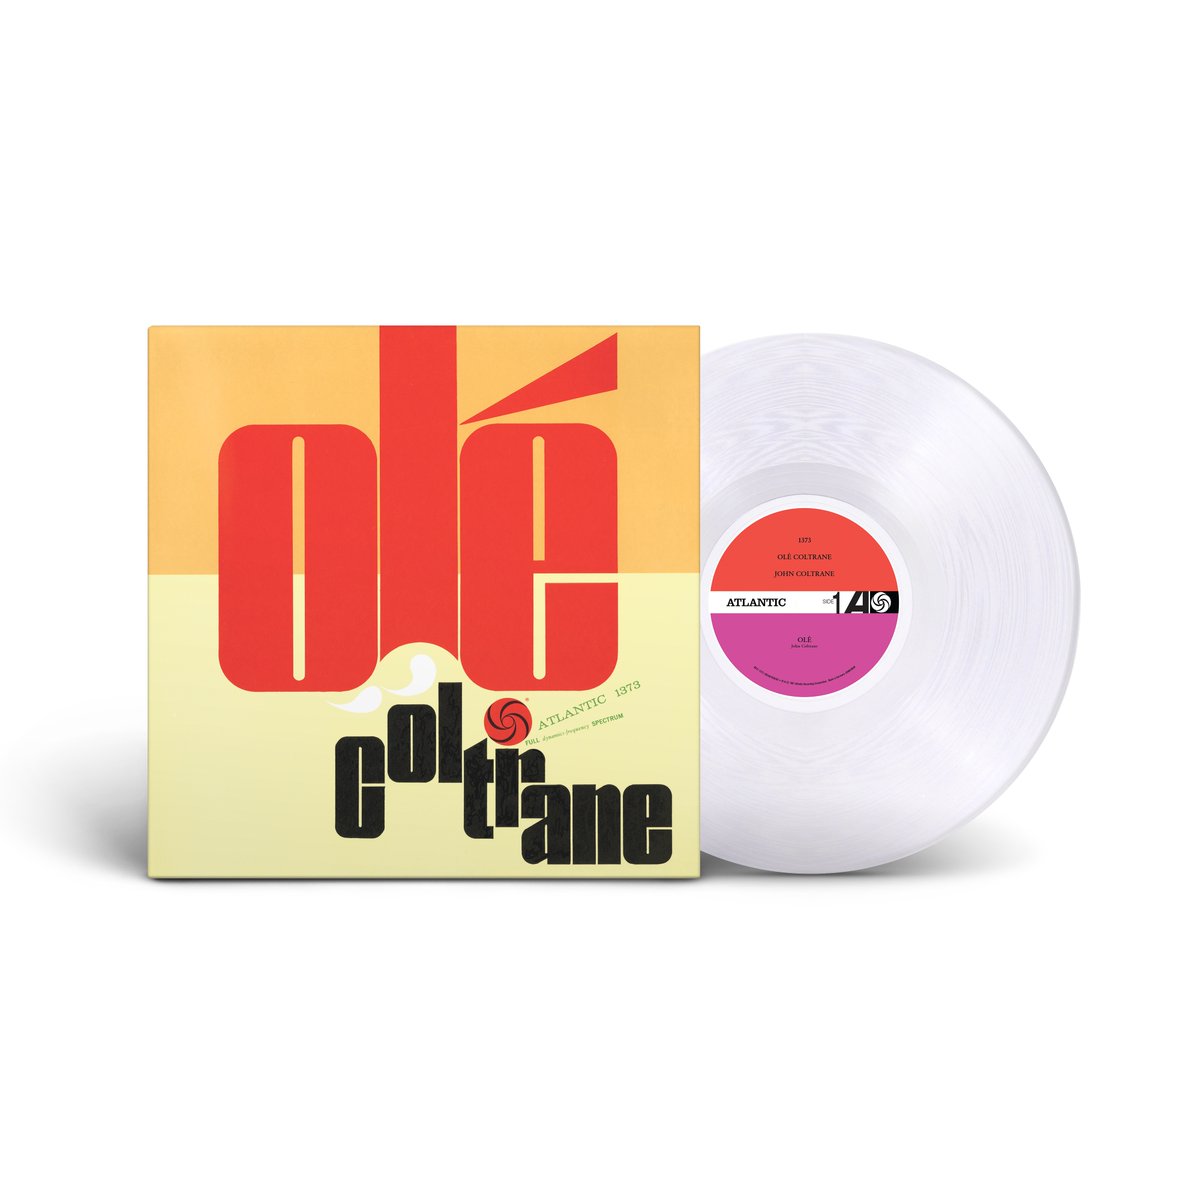 Reissued on clear diamond vinyl, Olé Coltrane, John Coltrane’s final Atlantic album recorded under his own supervision, is now available, celebrating 75 years of Atlantic Records. atlantic75.lnk.to/JohnColtrane